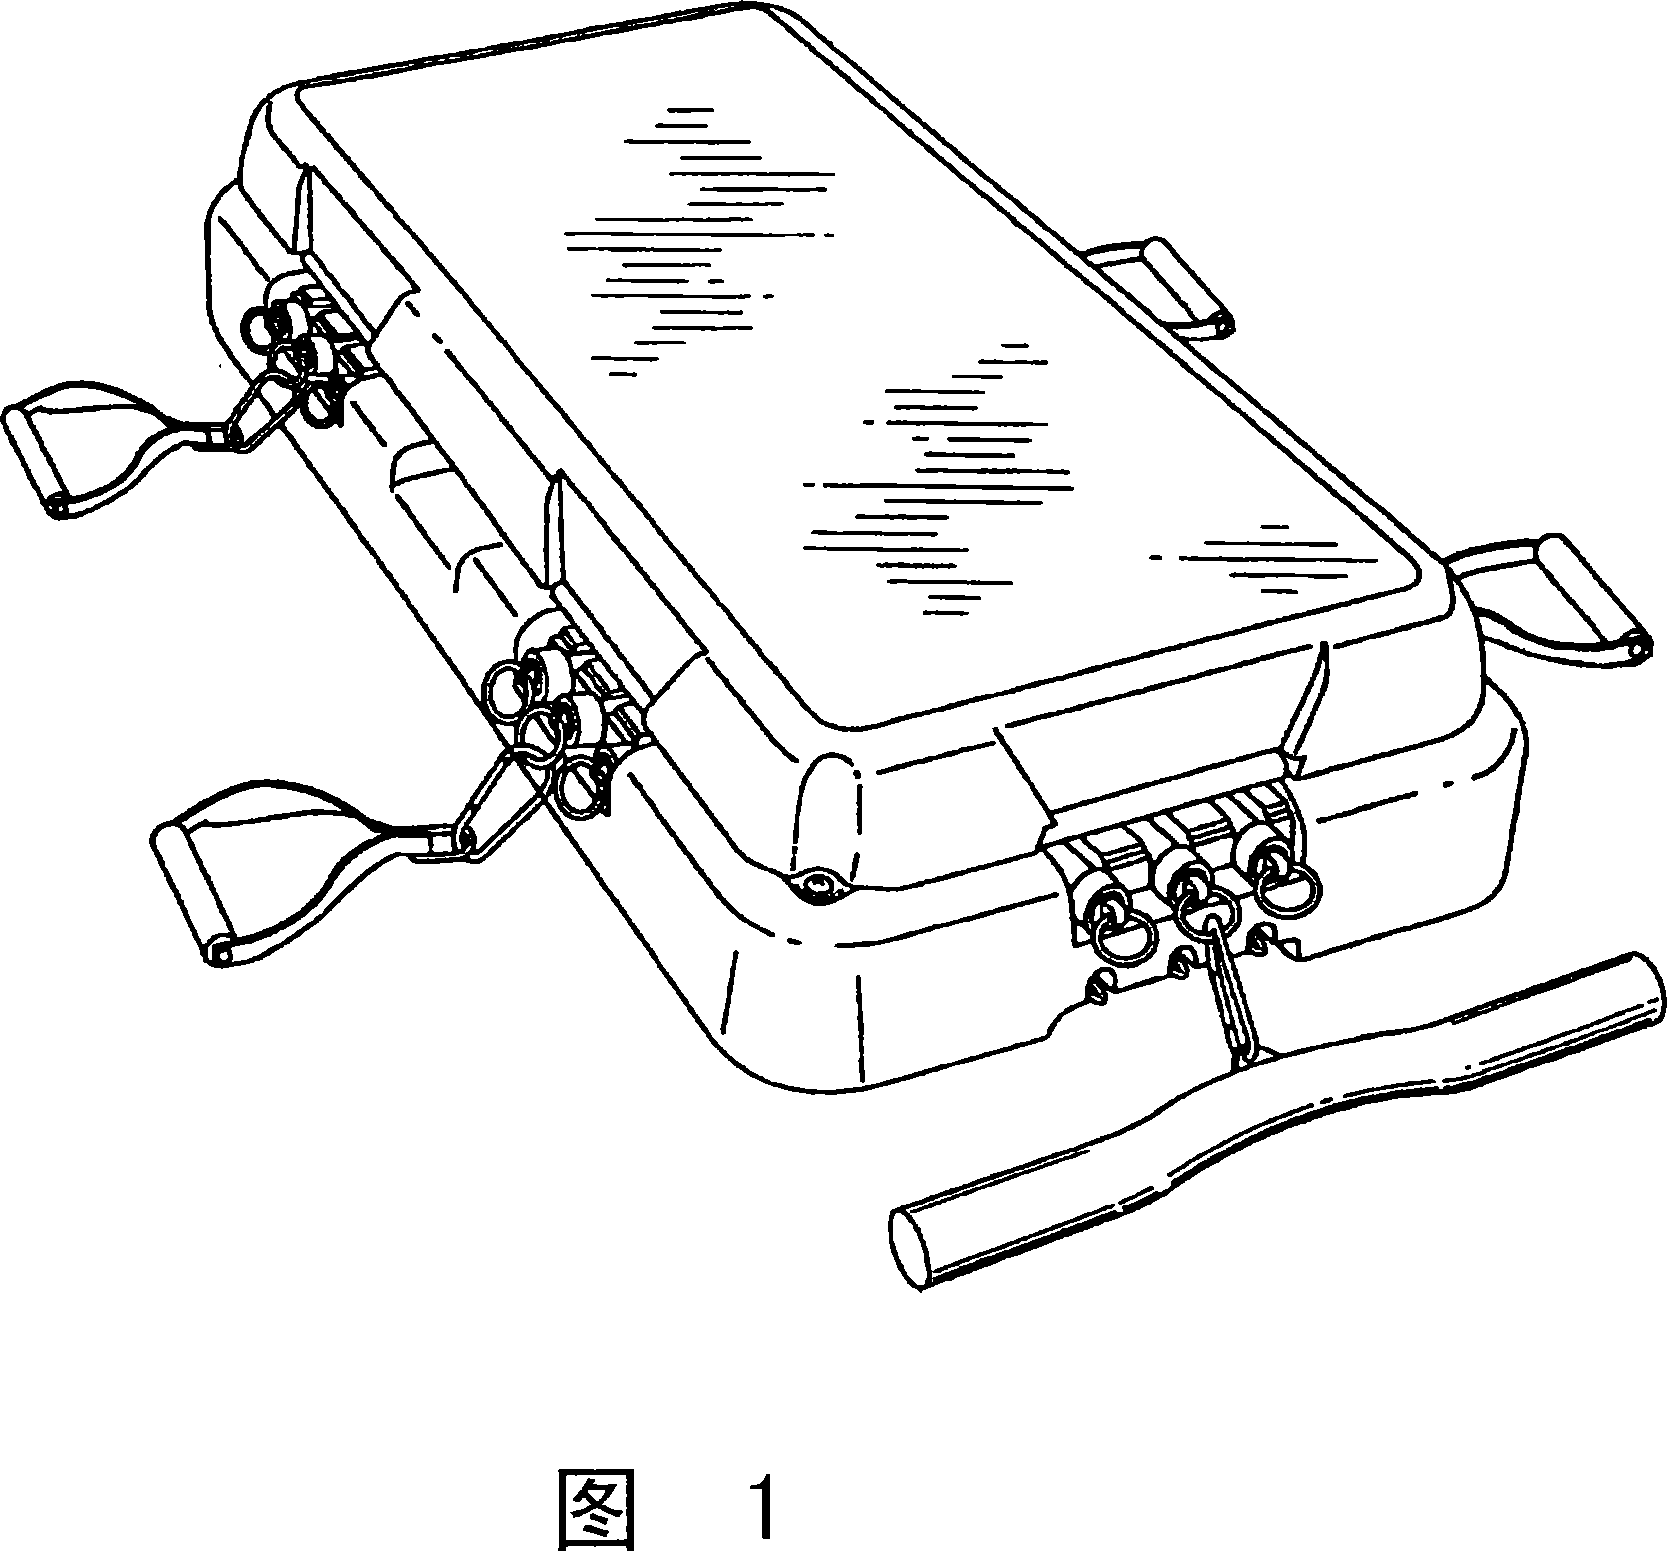 Apparatus for circuit and other fitness training